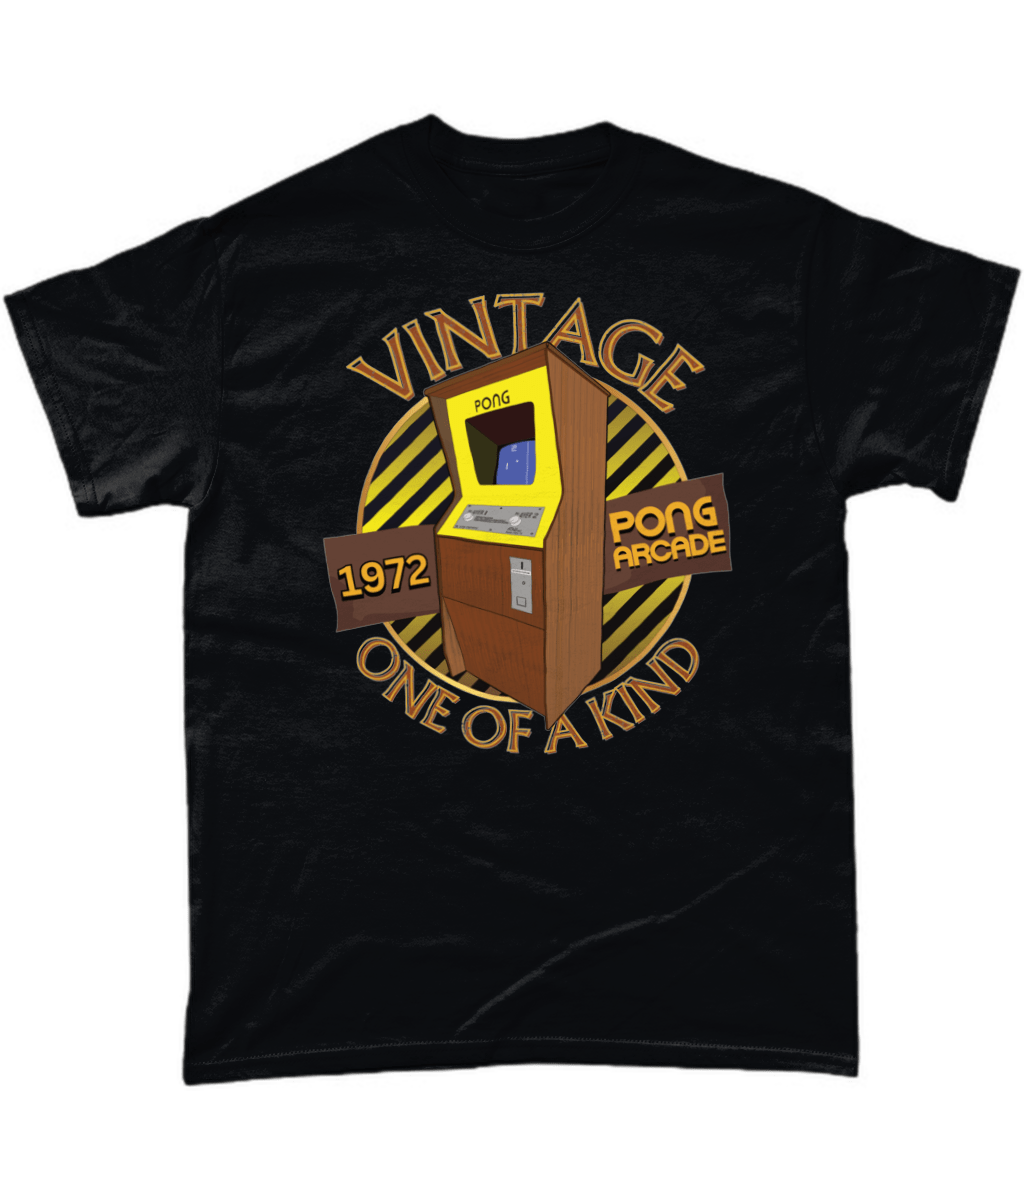 Black T-Shirt with words vintage,1972,pong arcade,one of a kind, image of a pong arcade machine in front of a yellow striped circle